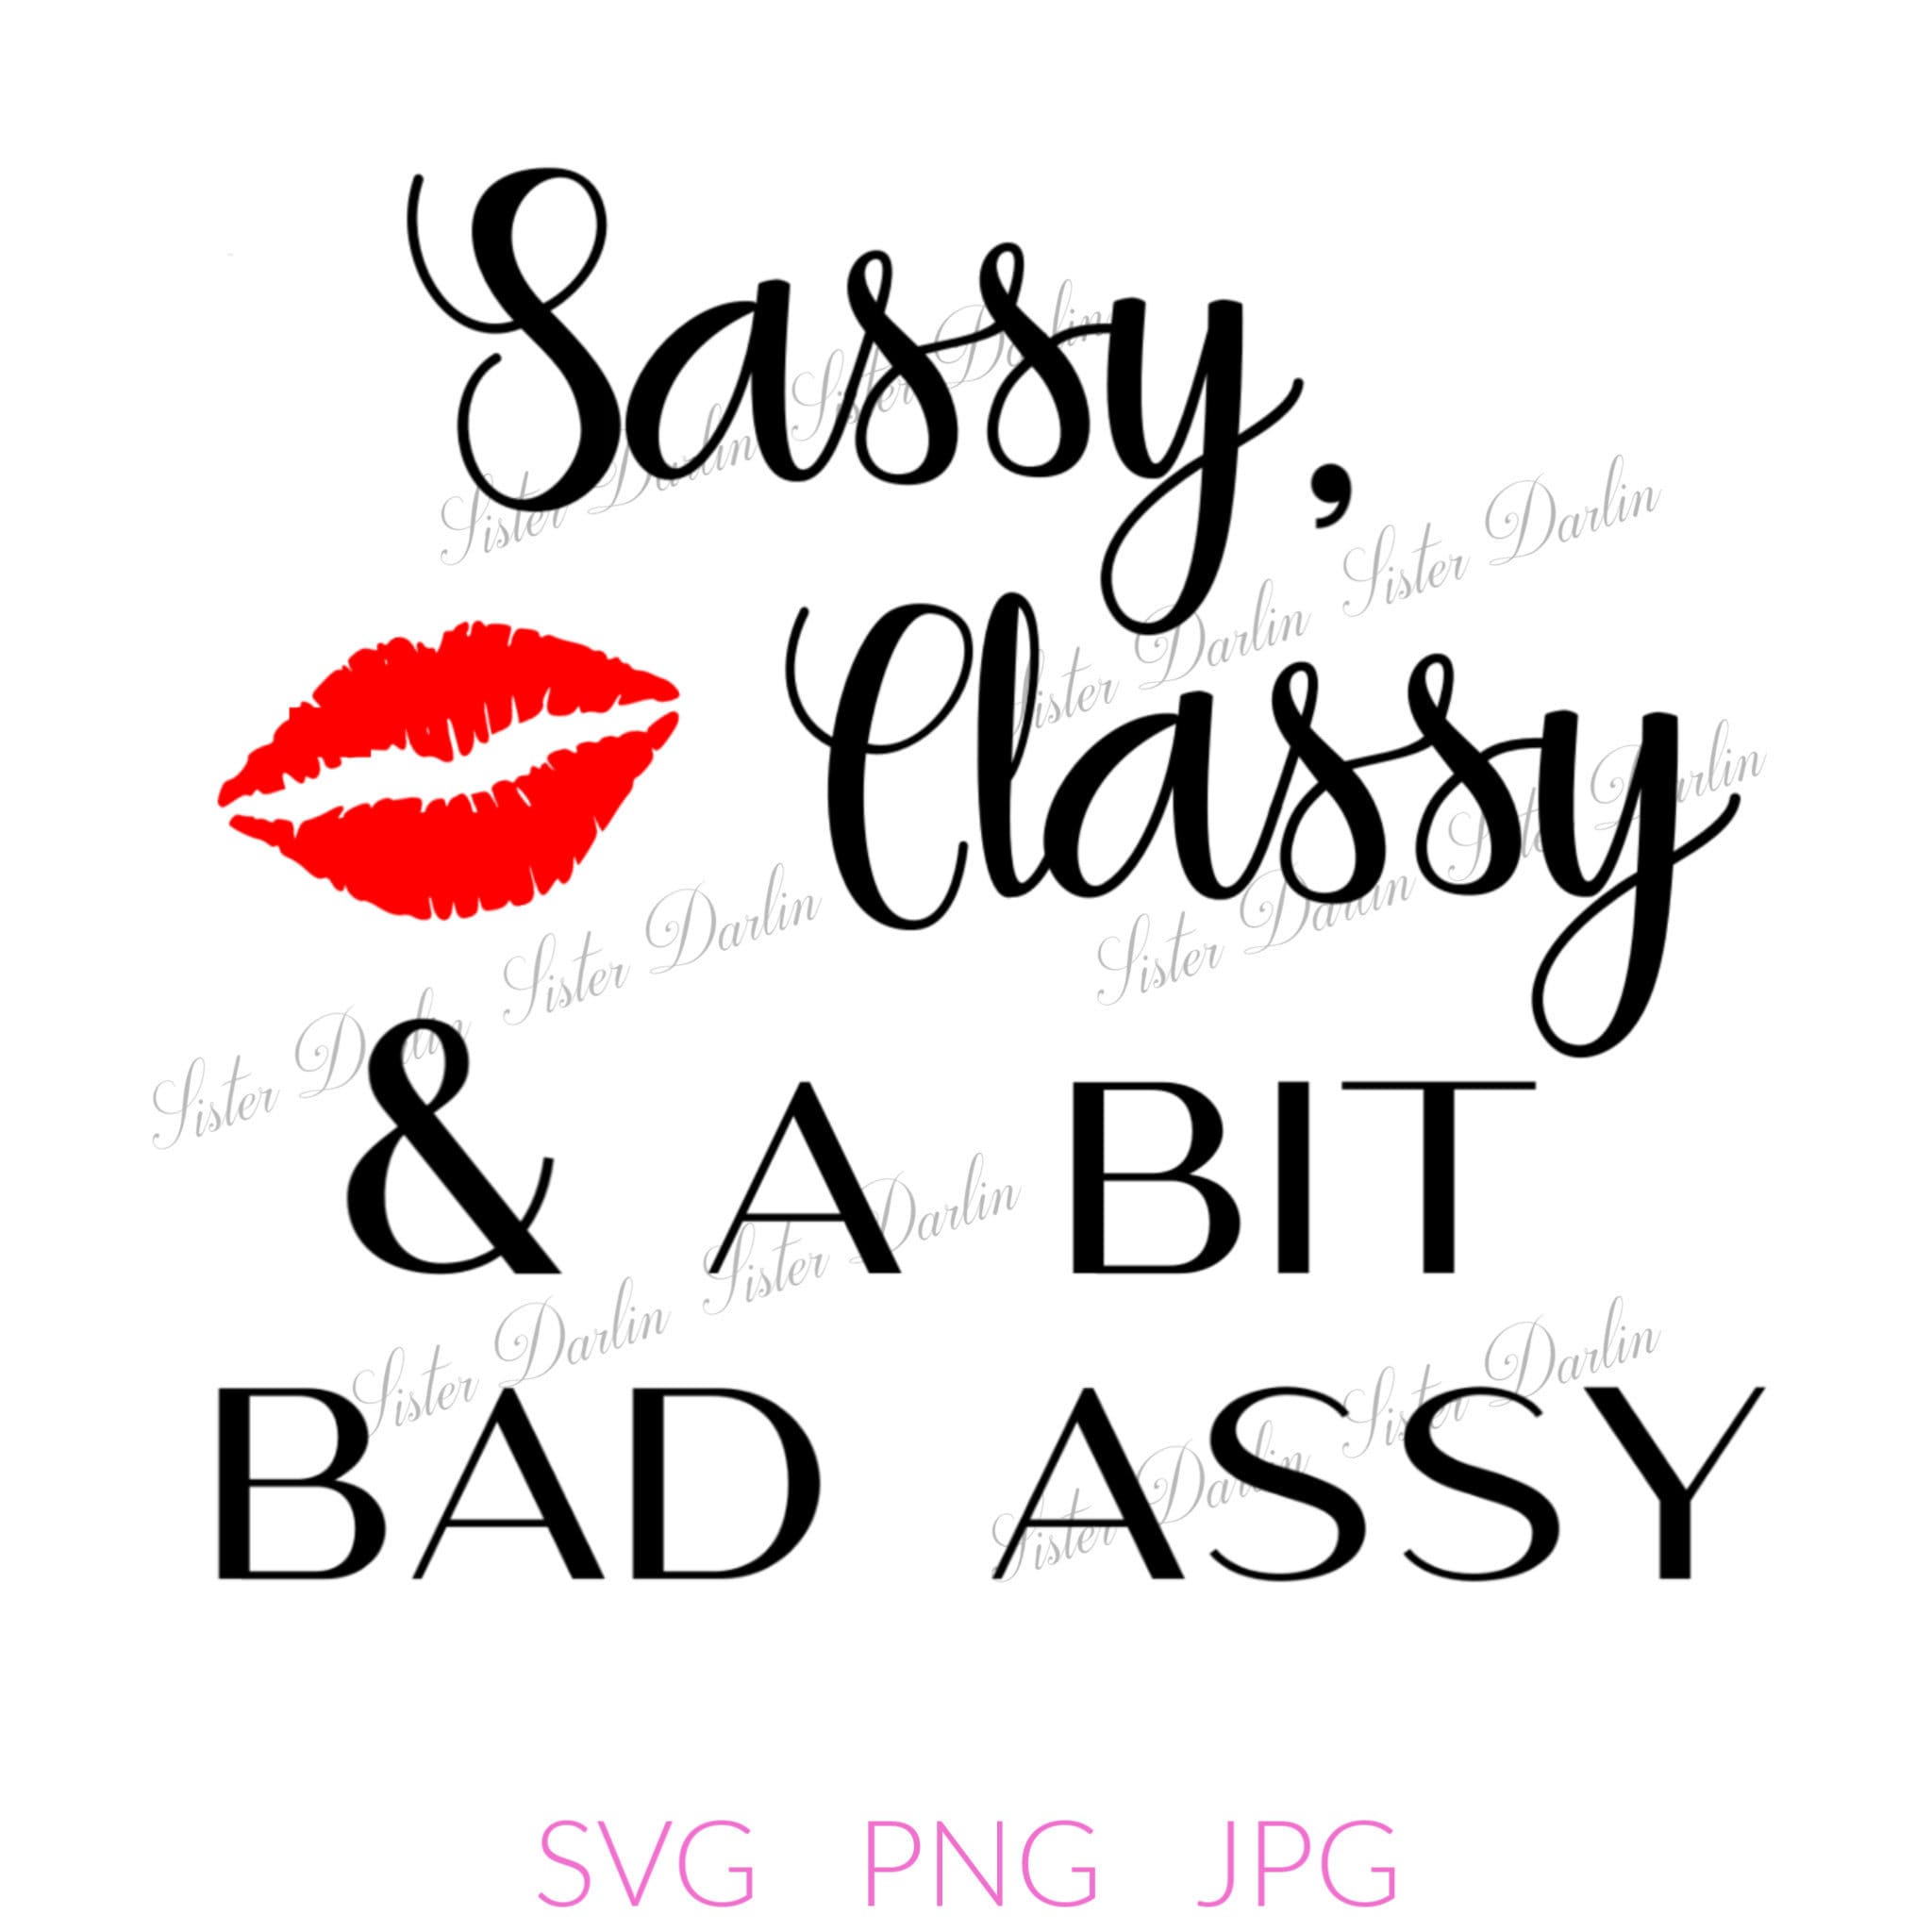 Download Sassy Quote Cricut Cut File Girly Svg